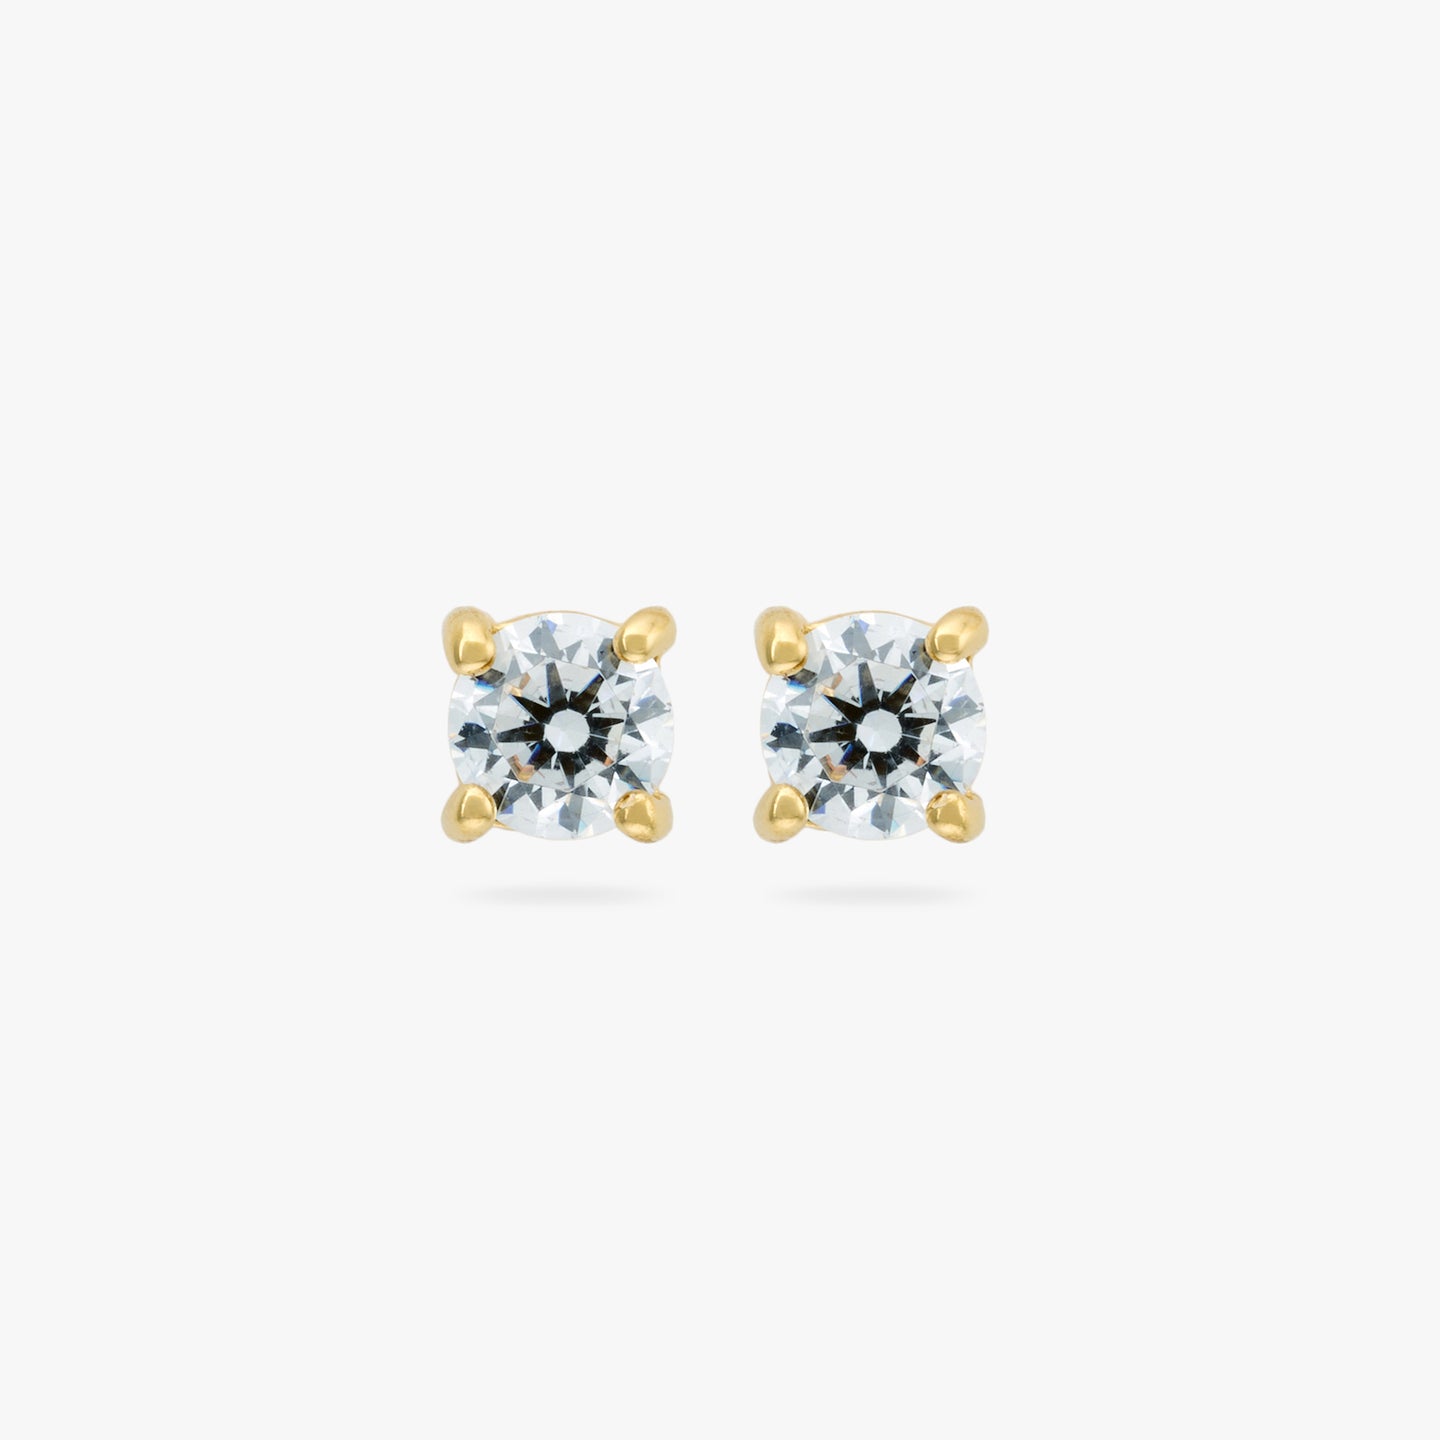 A pair of small CZ studs measuring 3mm. color:null|gold/clear